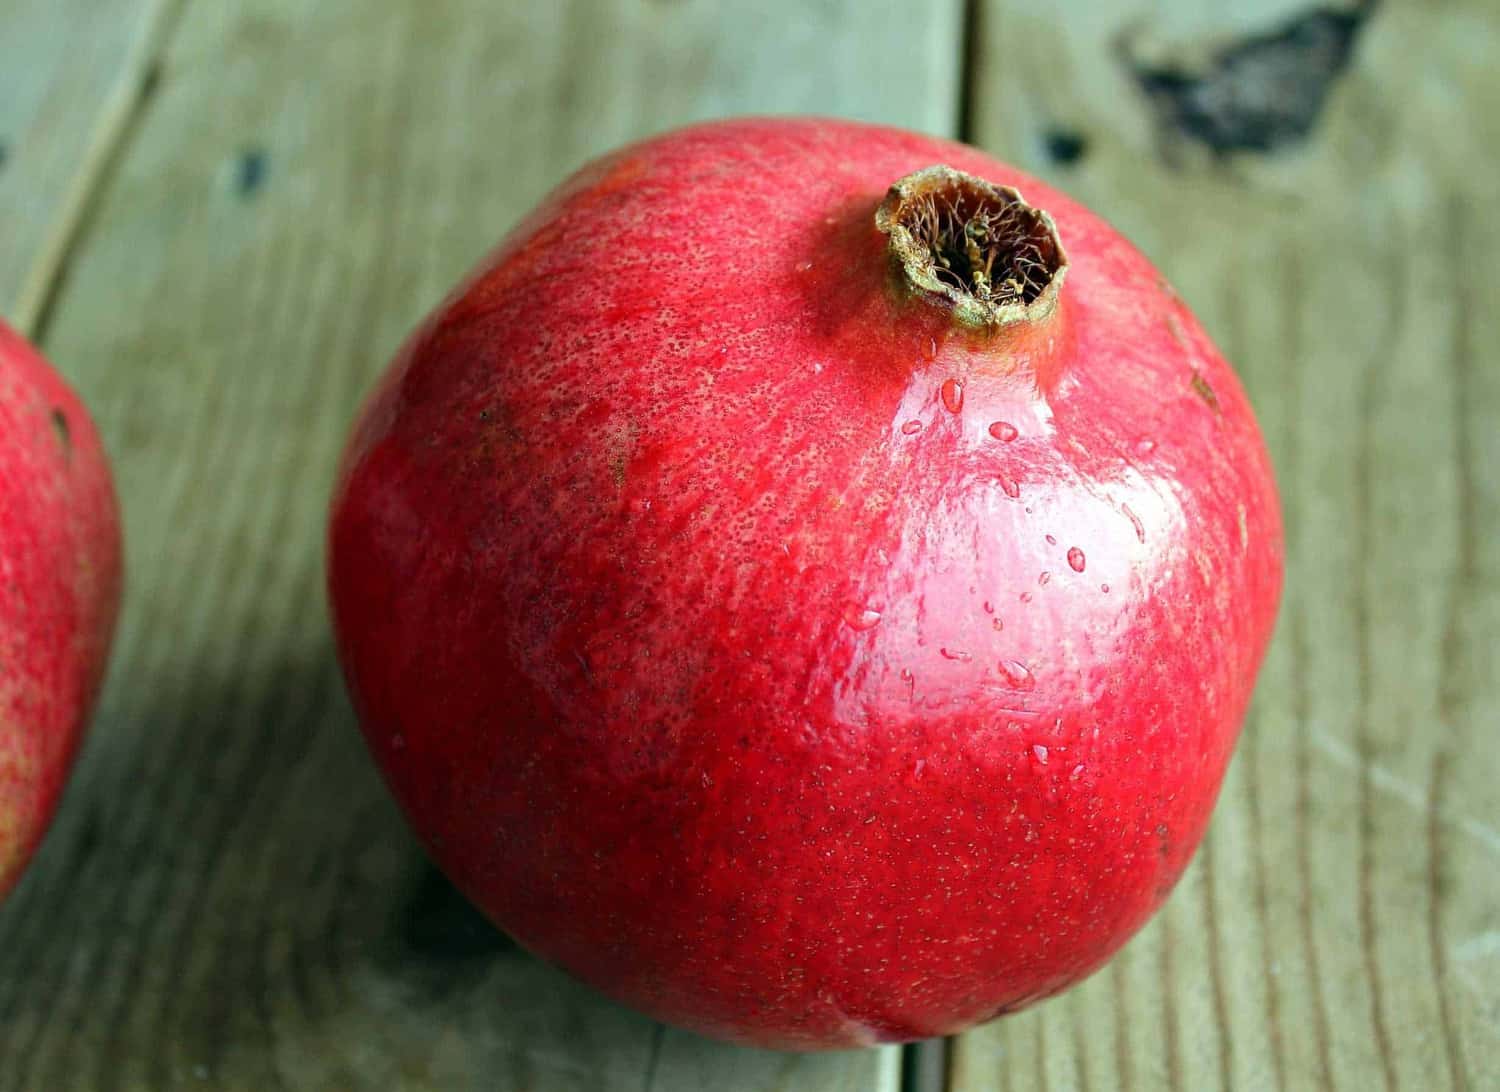 Fresh pomegranate on a wooden surface.